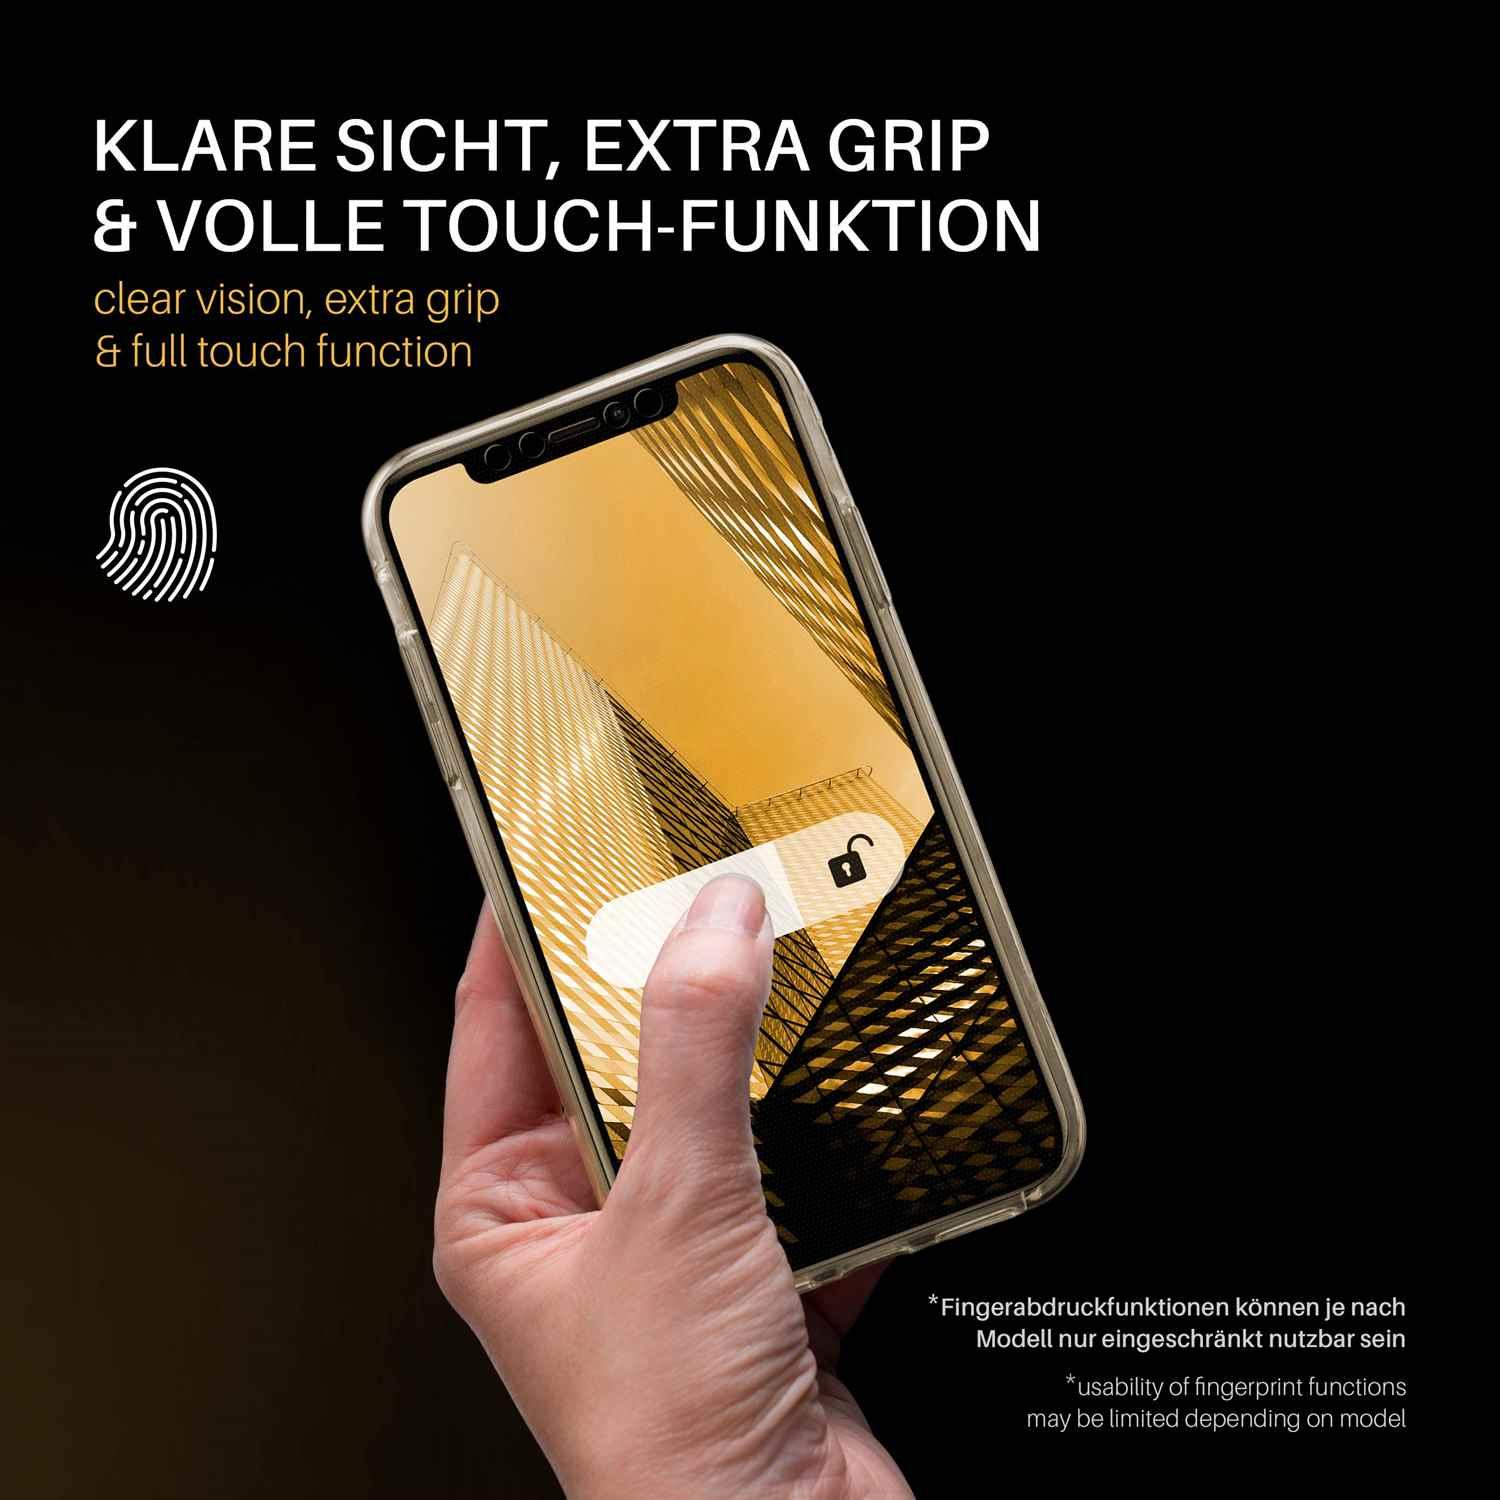 MOEX Double Case, Full Cover, 5s, iPhone Gold Apple